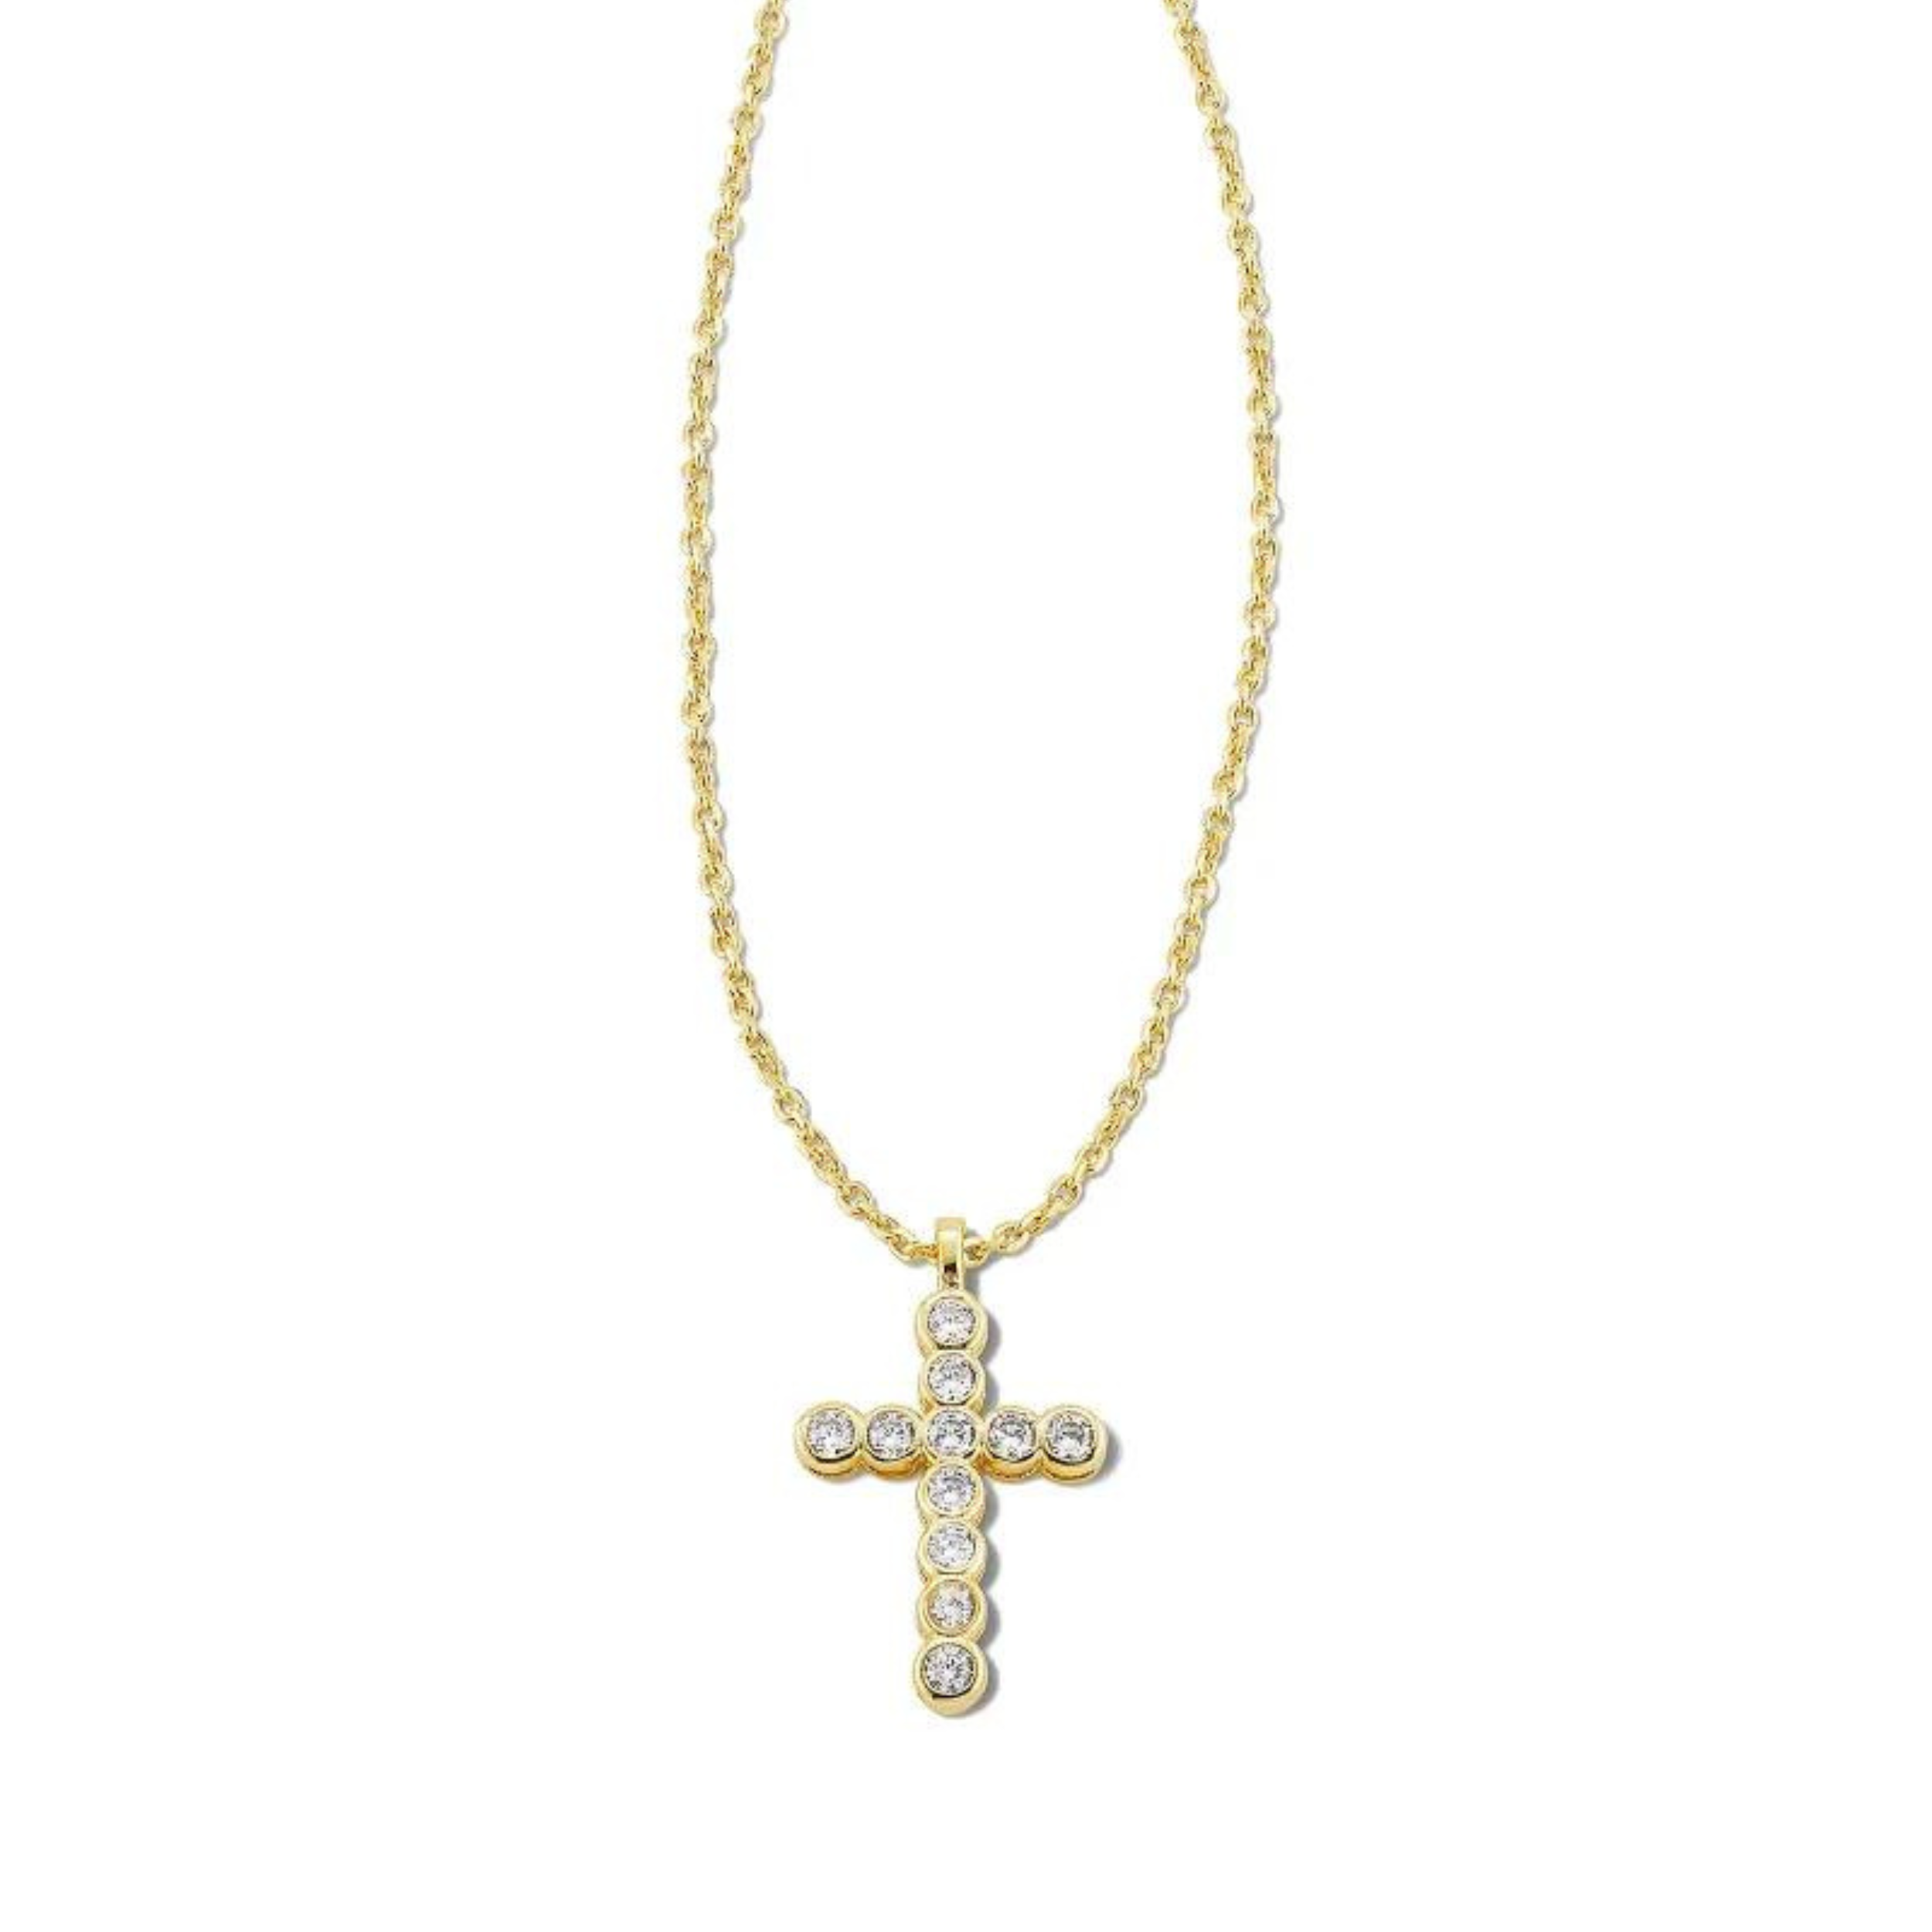 Gold necklace with cross pendant with white crystals, pictured on a white background.